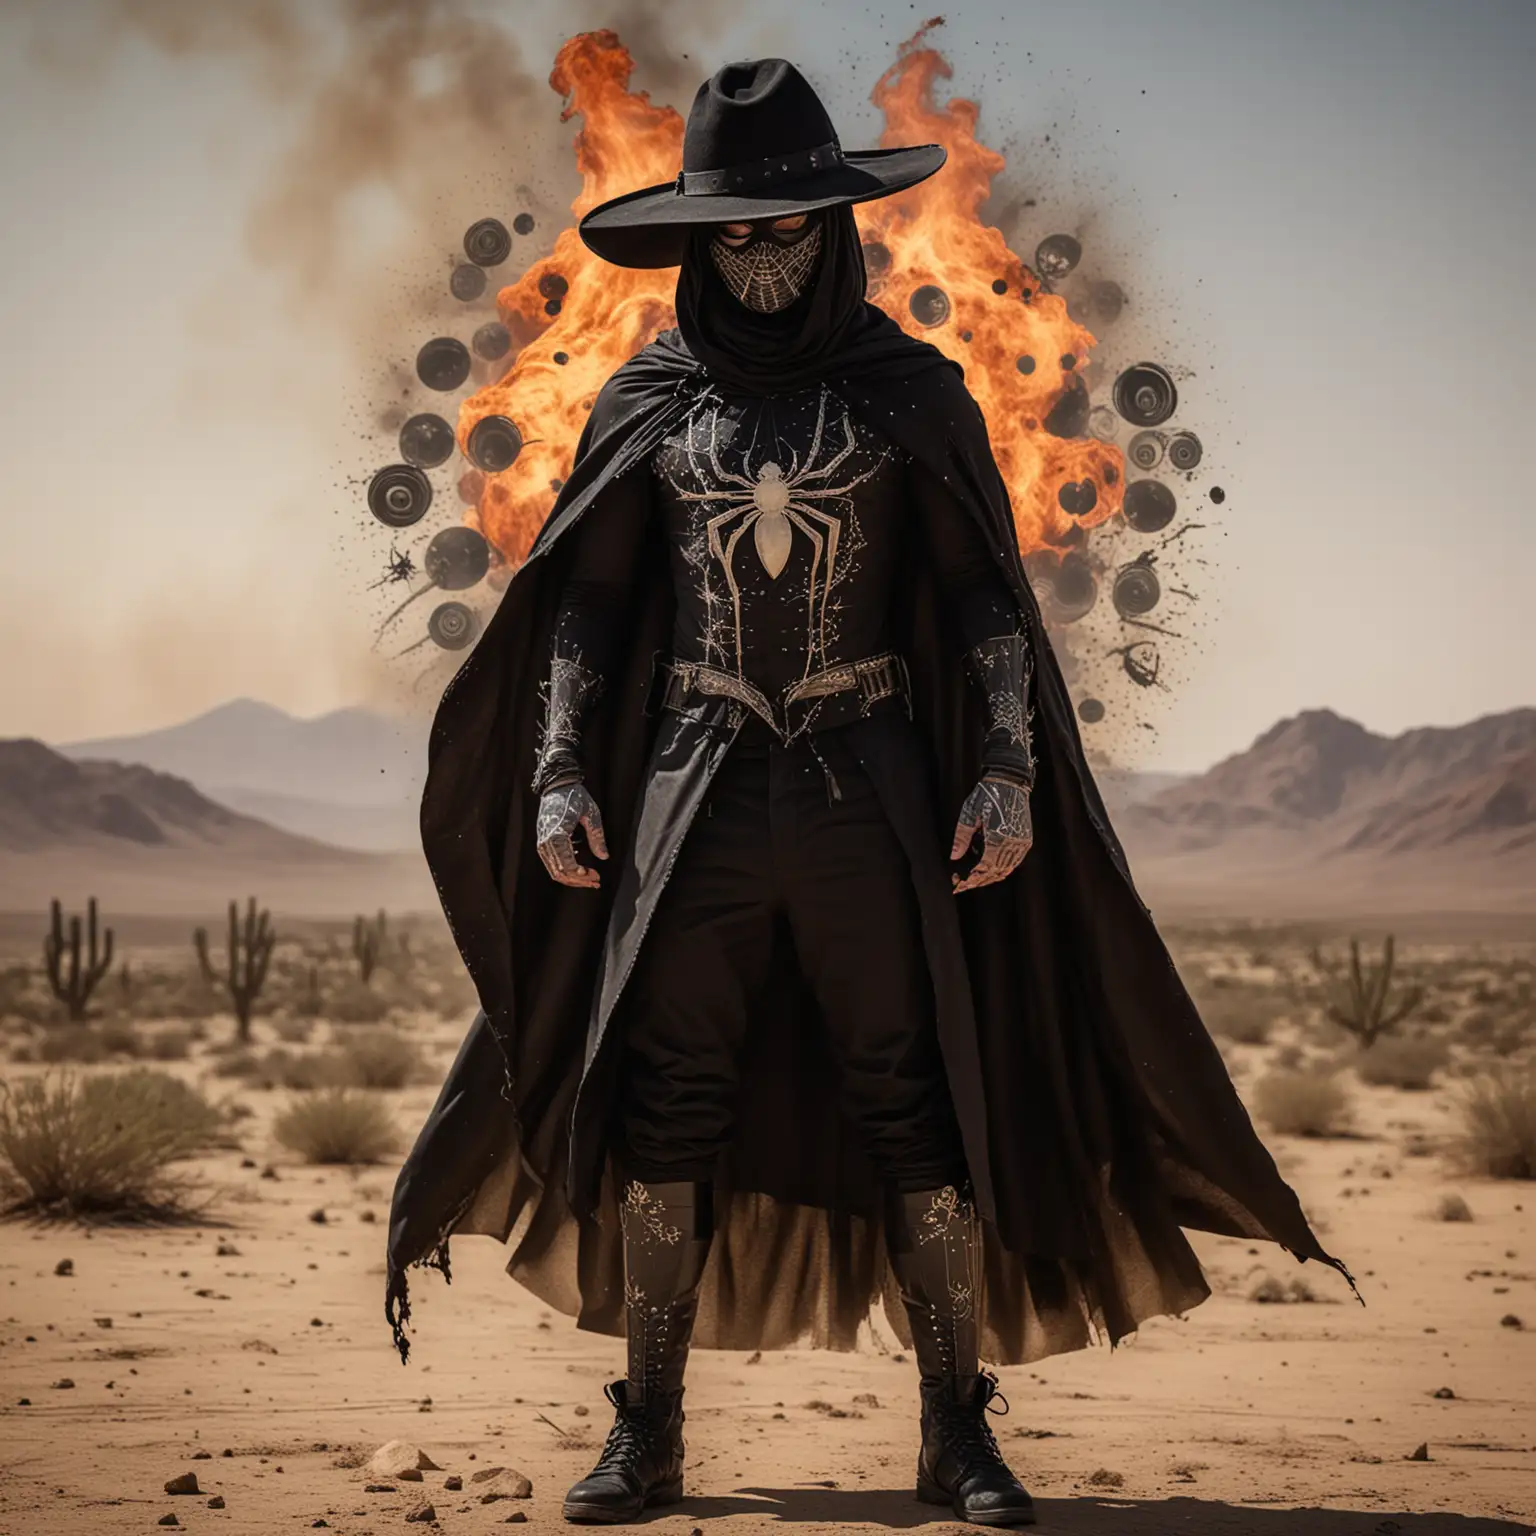 Tall Man in Black Costume with Spider Tattoo Fighting in Desert Fire Circles